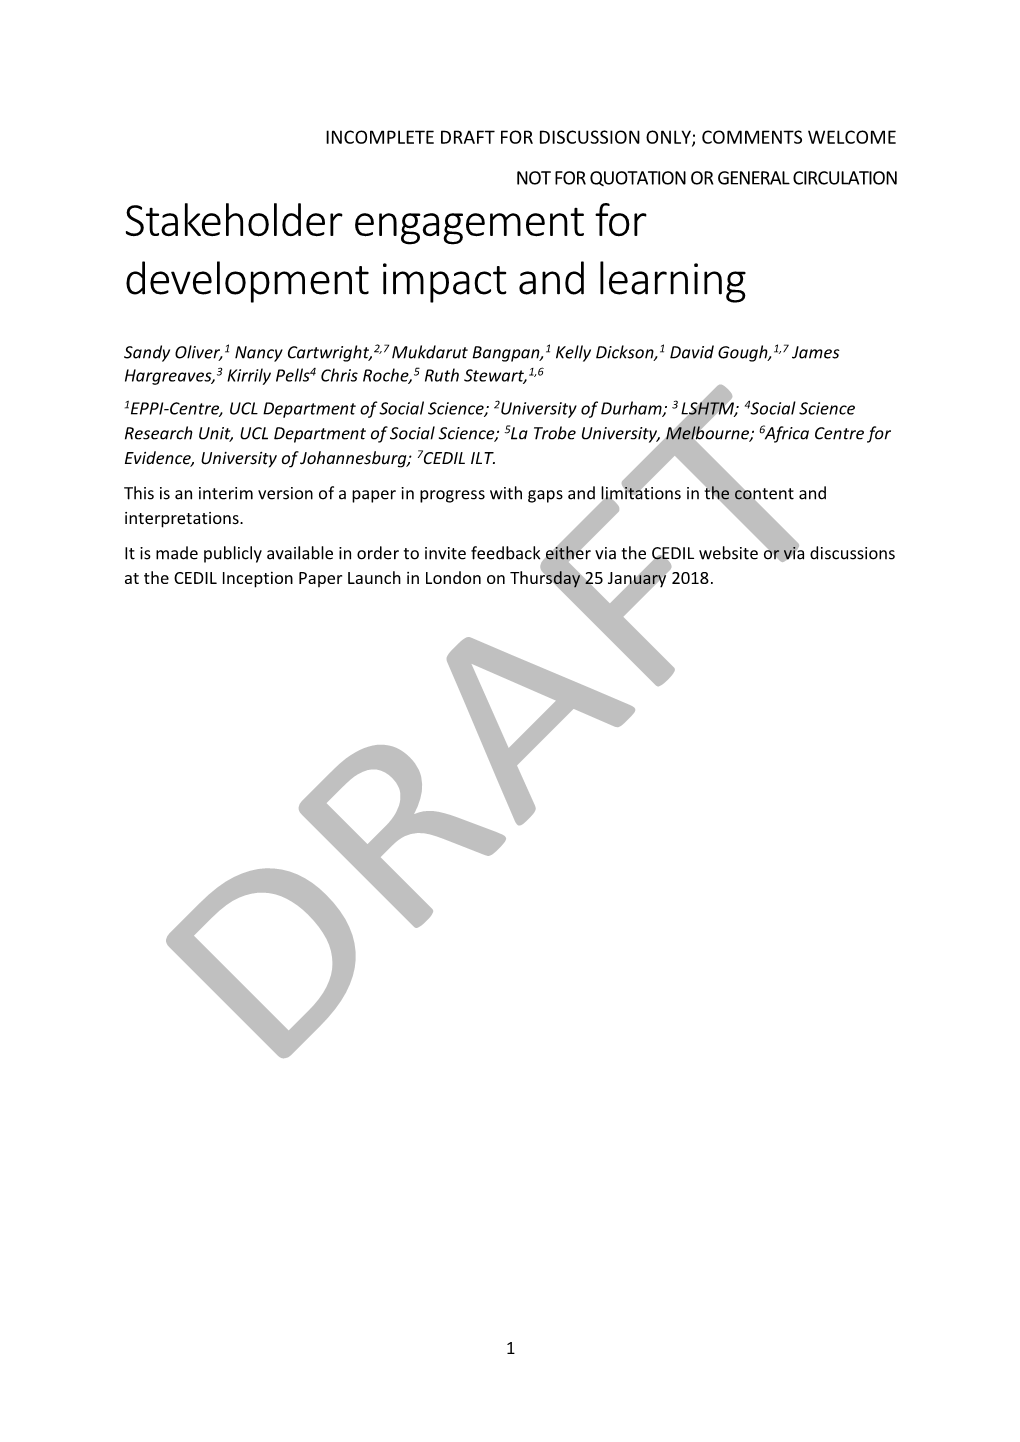 Stakeholder Engagement for Development Impact and Learning